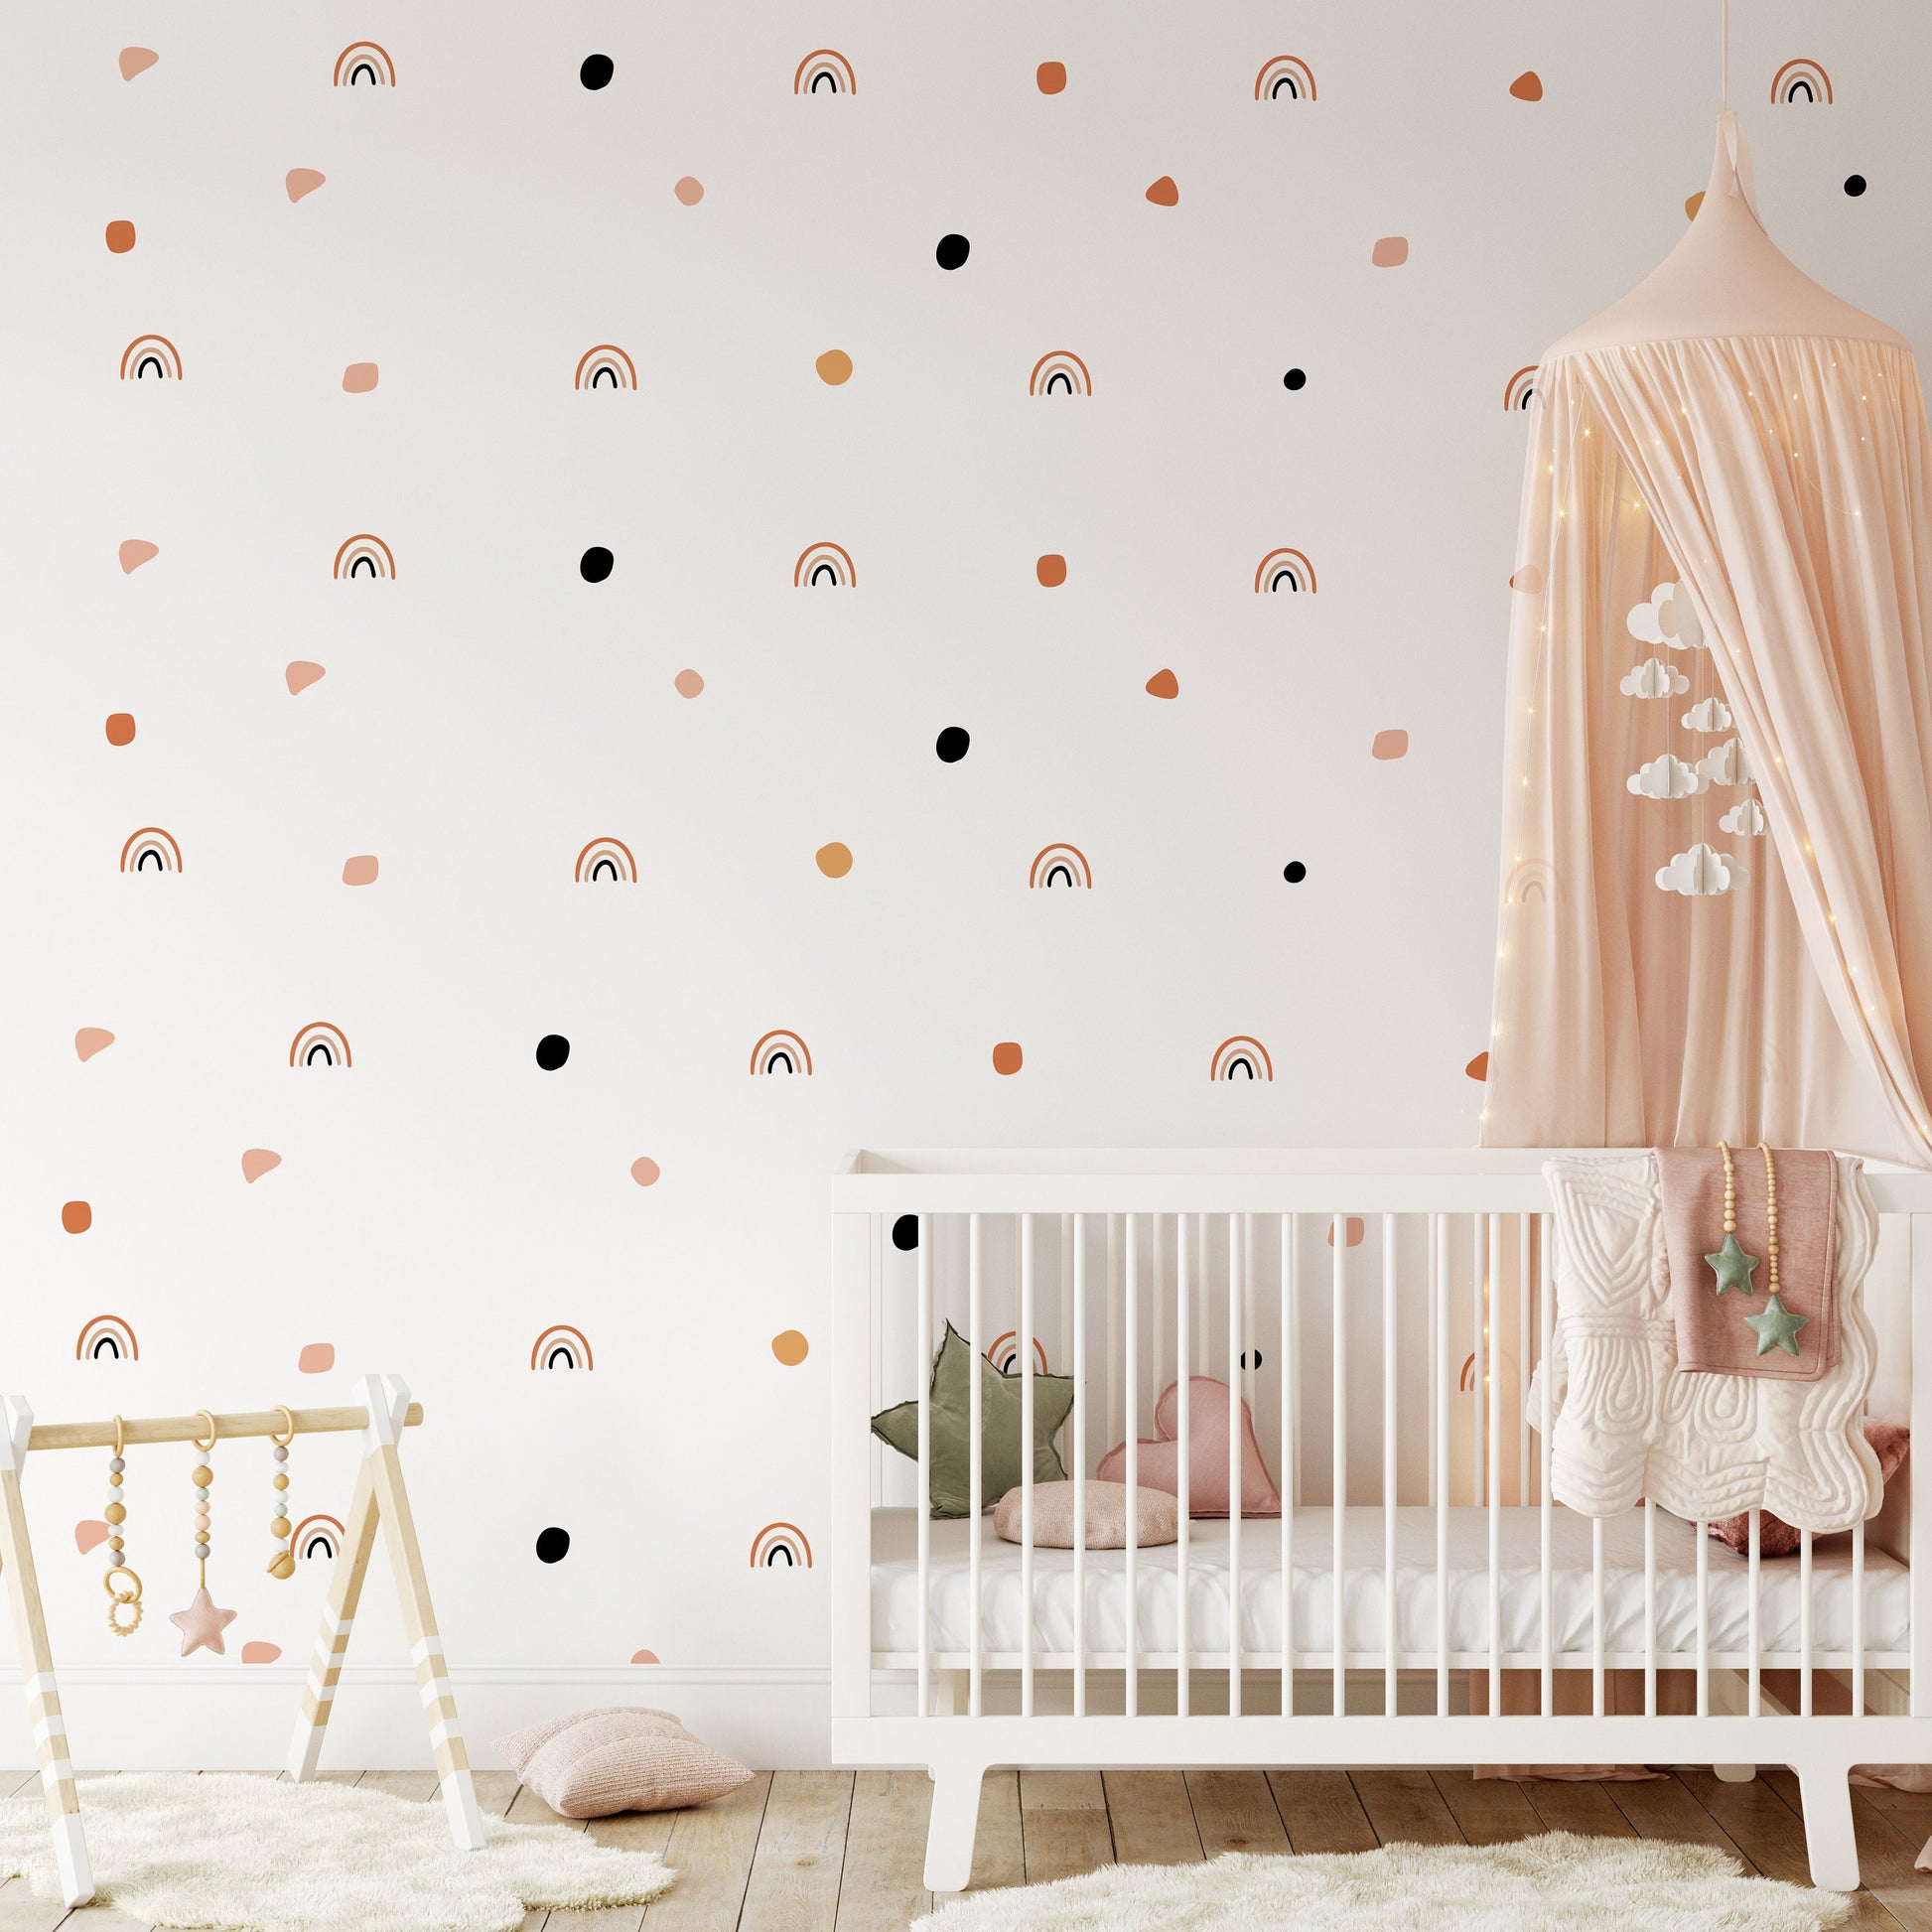 Cute Boho Colour Rainbow Wall Decals For Nursery Removable Wall Decor Chic Pastel Stickers For Walls